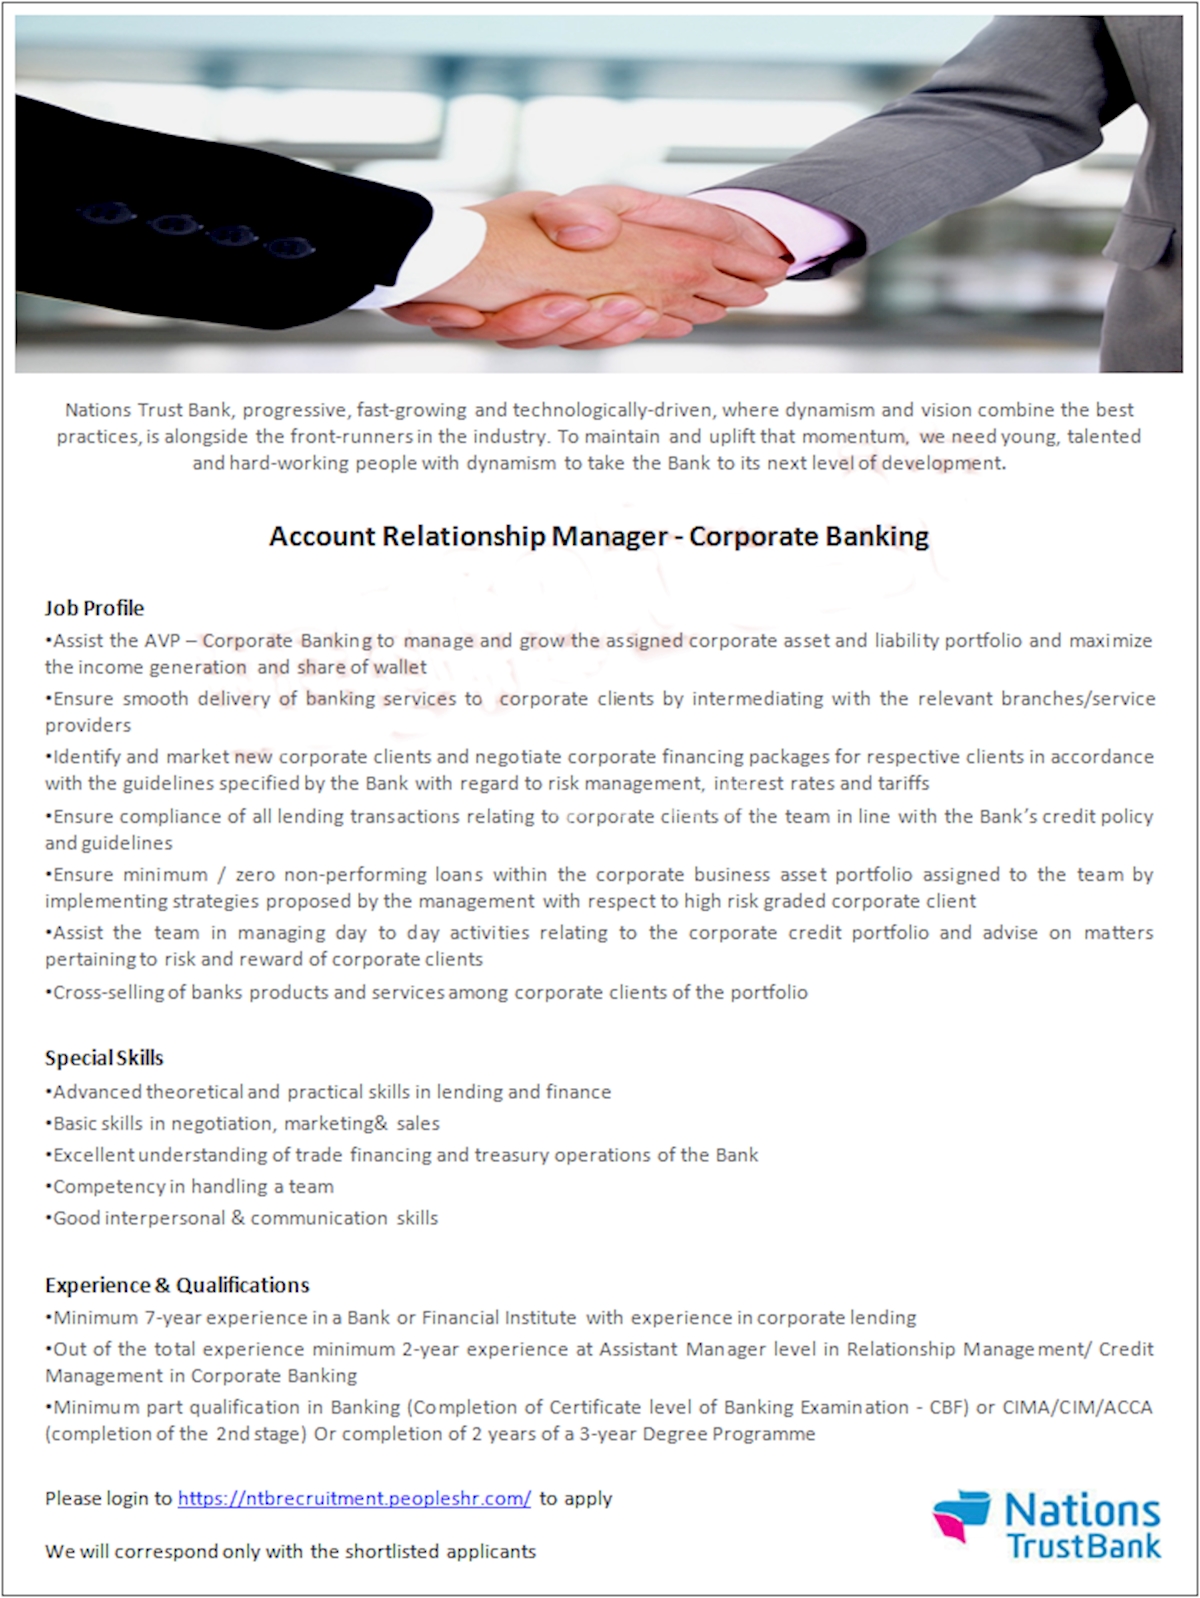 Account Relationship Manager - Corporate Banking